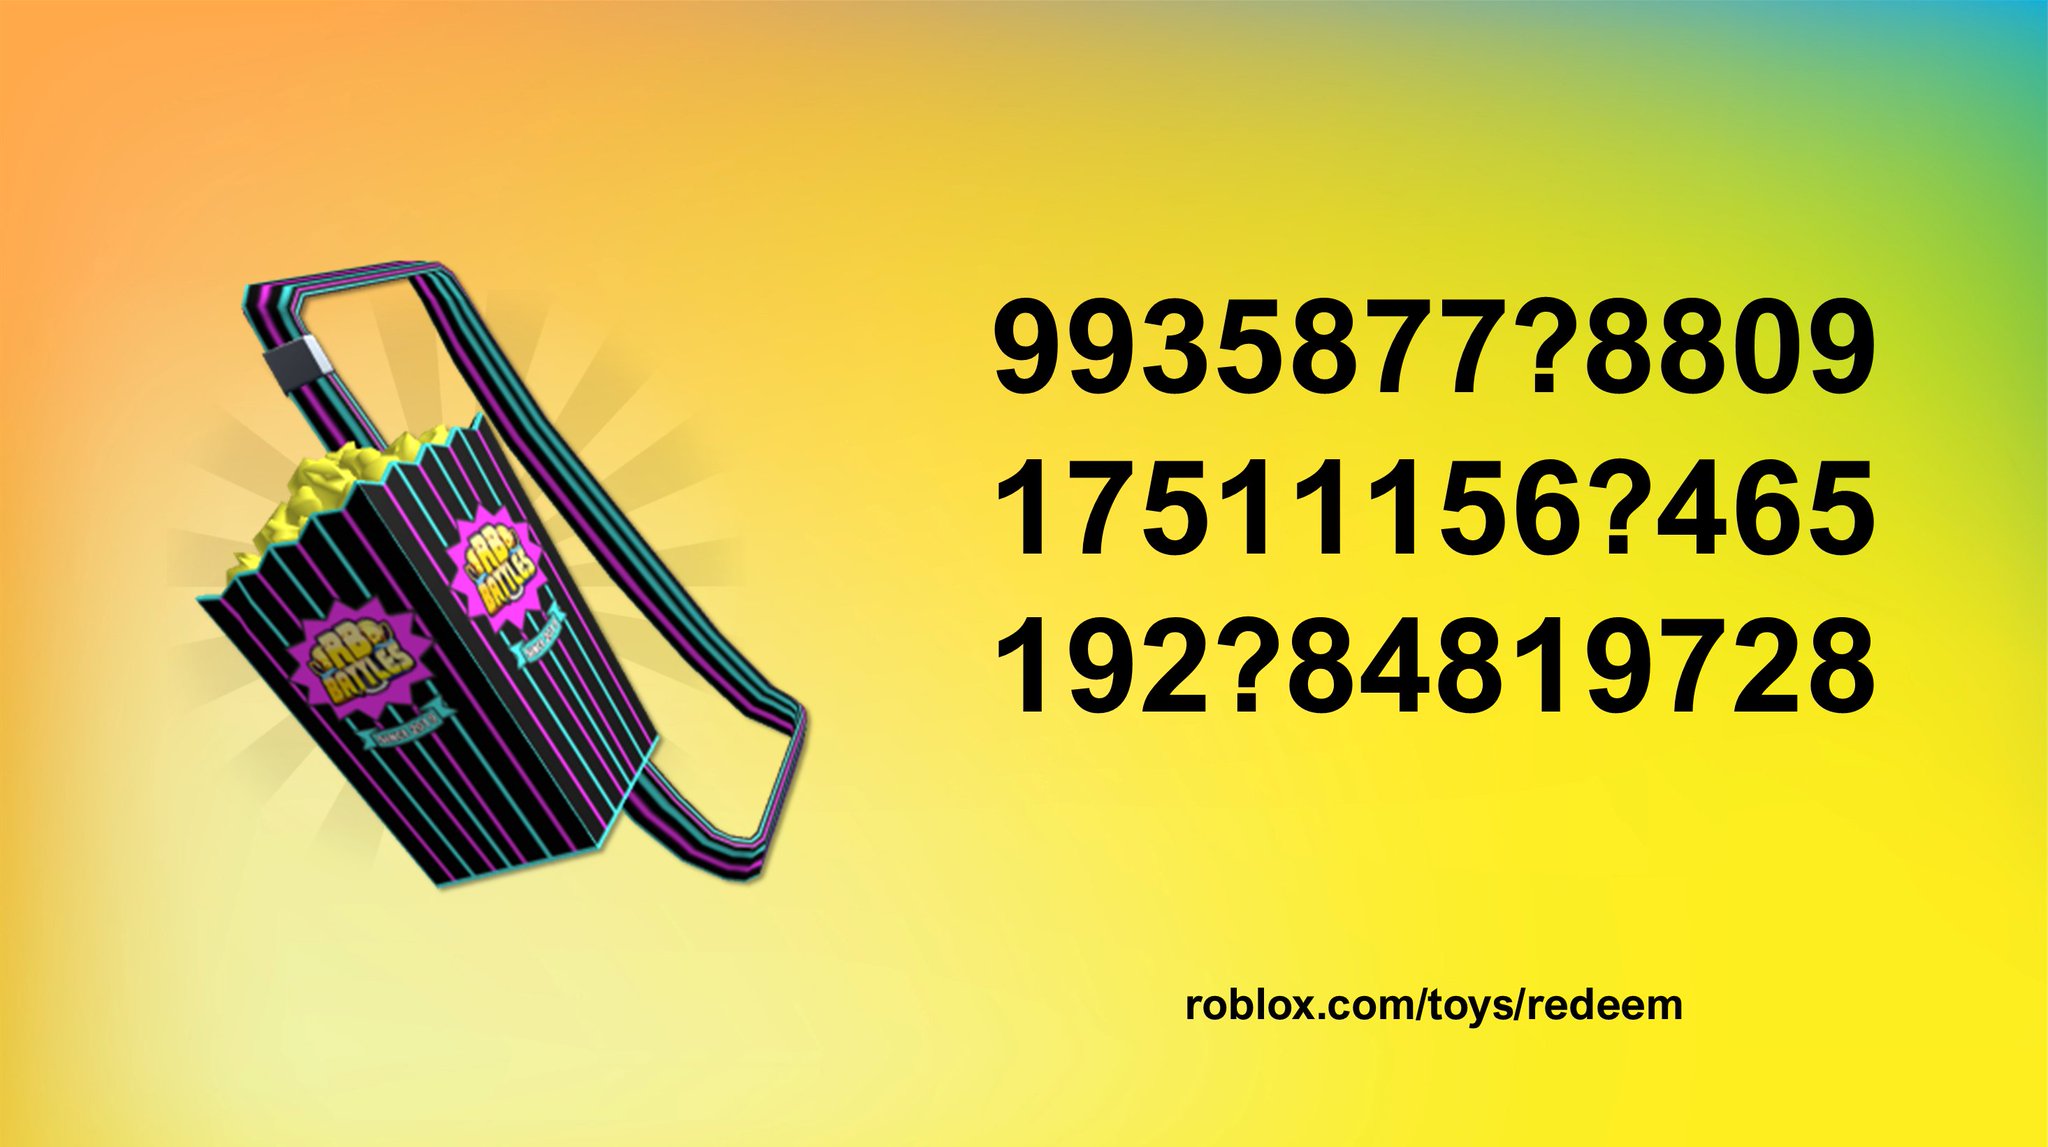 Bloxy News On Twitter Here Are A Few One Time Use Rbbattles Popcorn Bucket Codes If You Can Find The Missing Number In Each Code The Item Is Yours Redeem At Https T Co Mkc7gqa4jk - roblox.com/toys codes